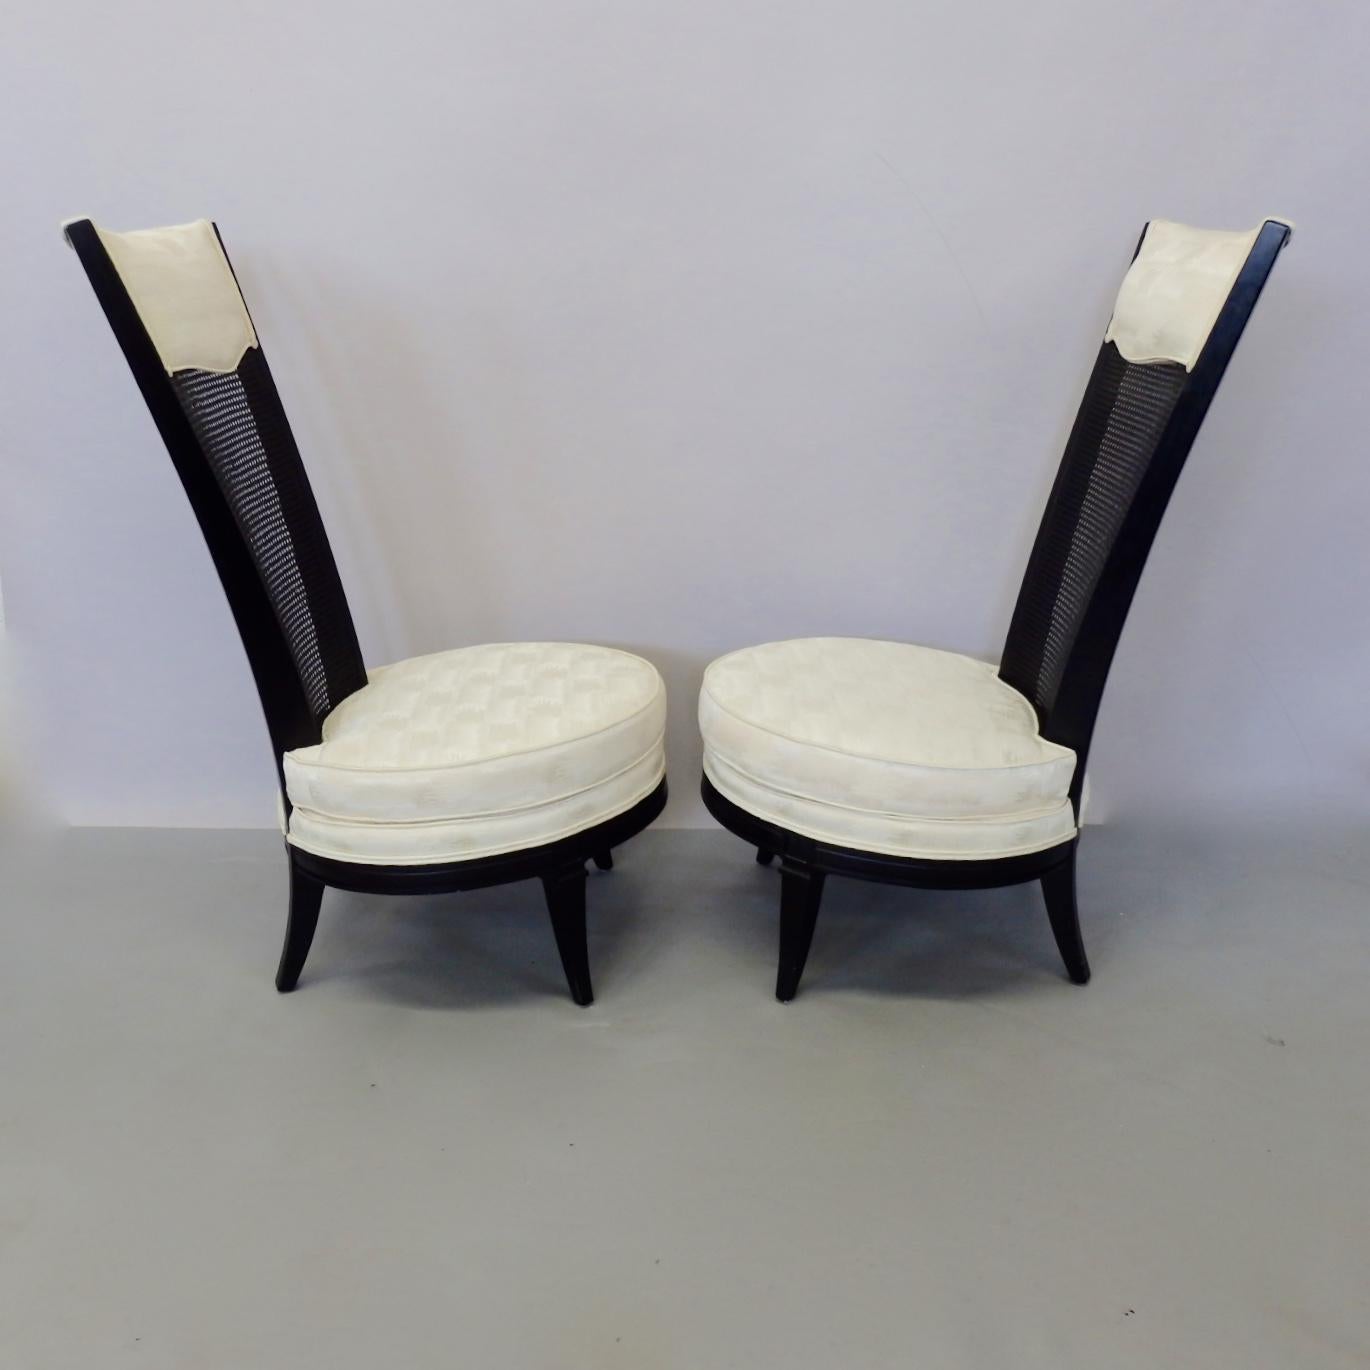 Mid-20th Century Pair of James Mont Style Hollywood Regency Lounge Chairs